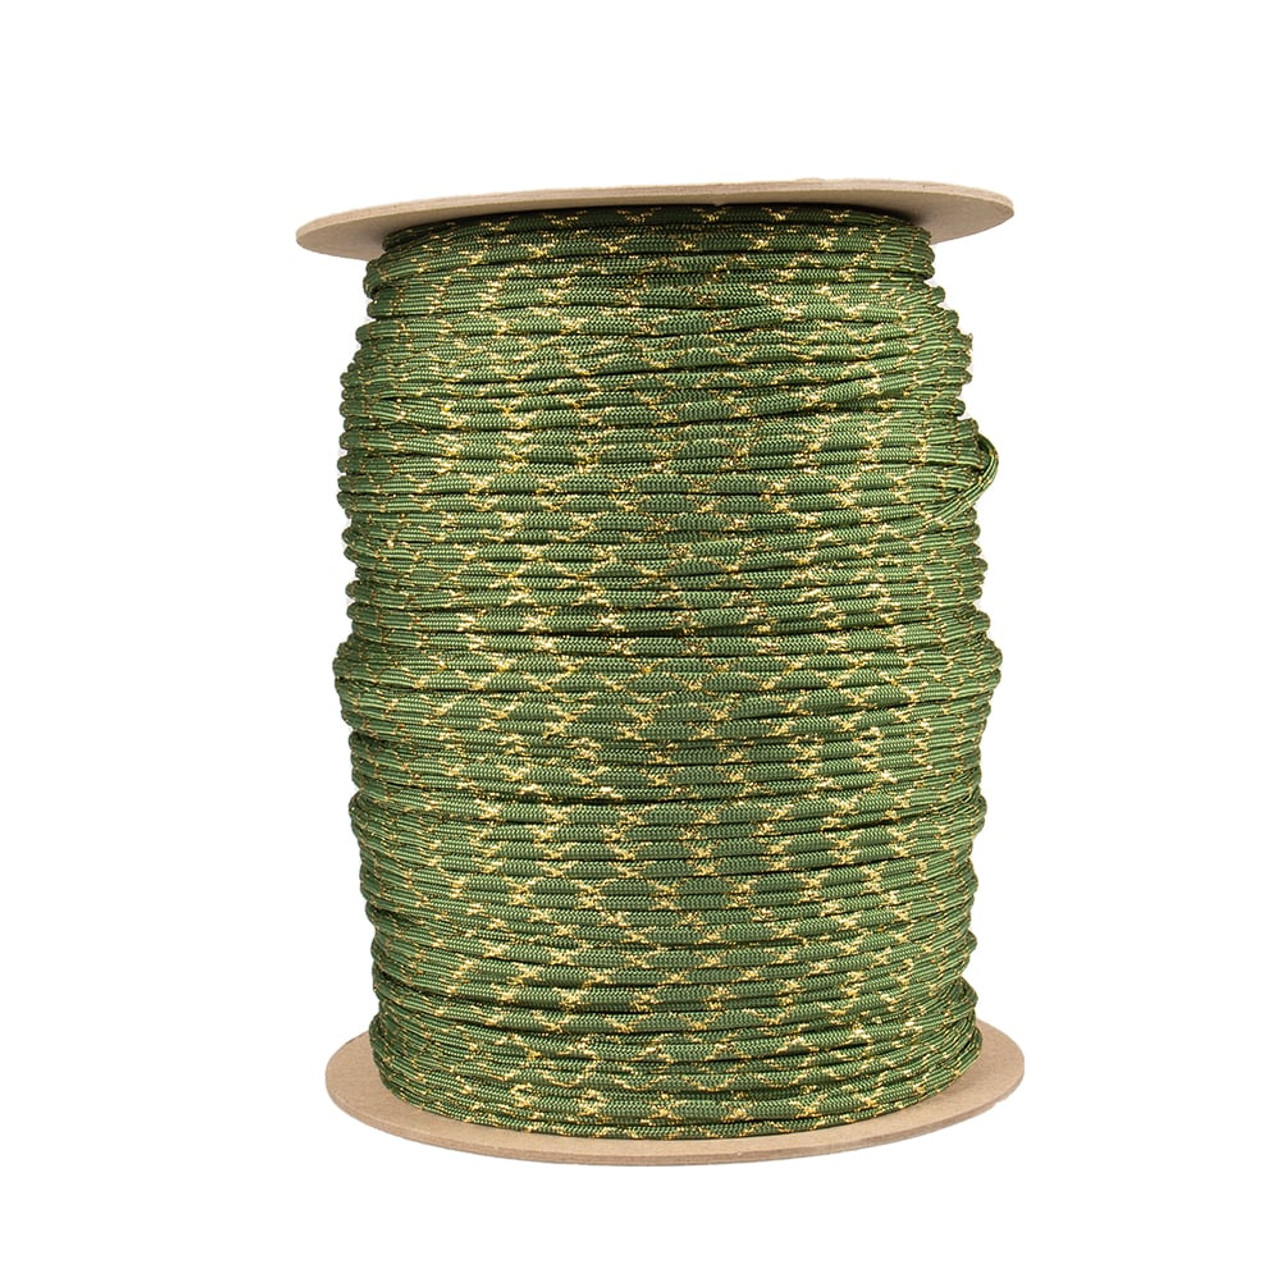 Fern Green with Gold Metallic X 550 Paracord (7-Strand) - Spools